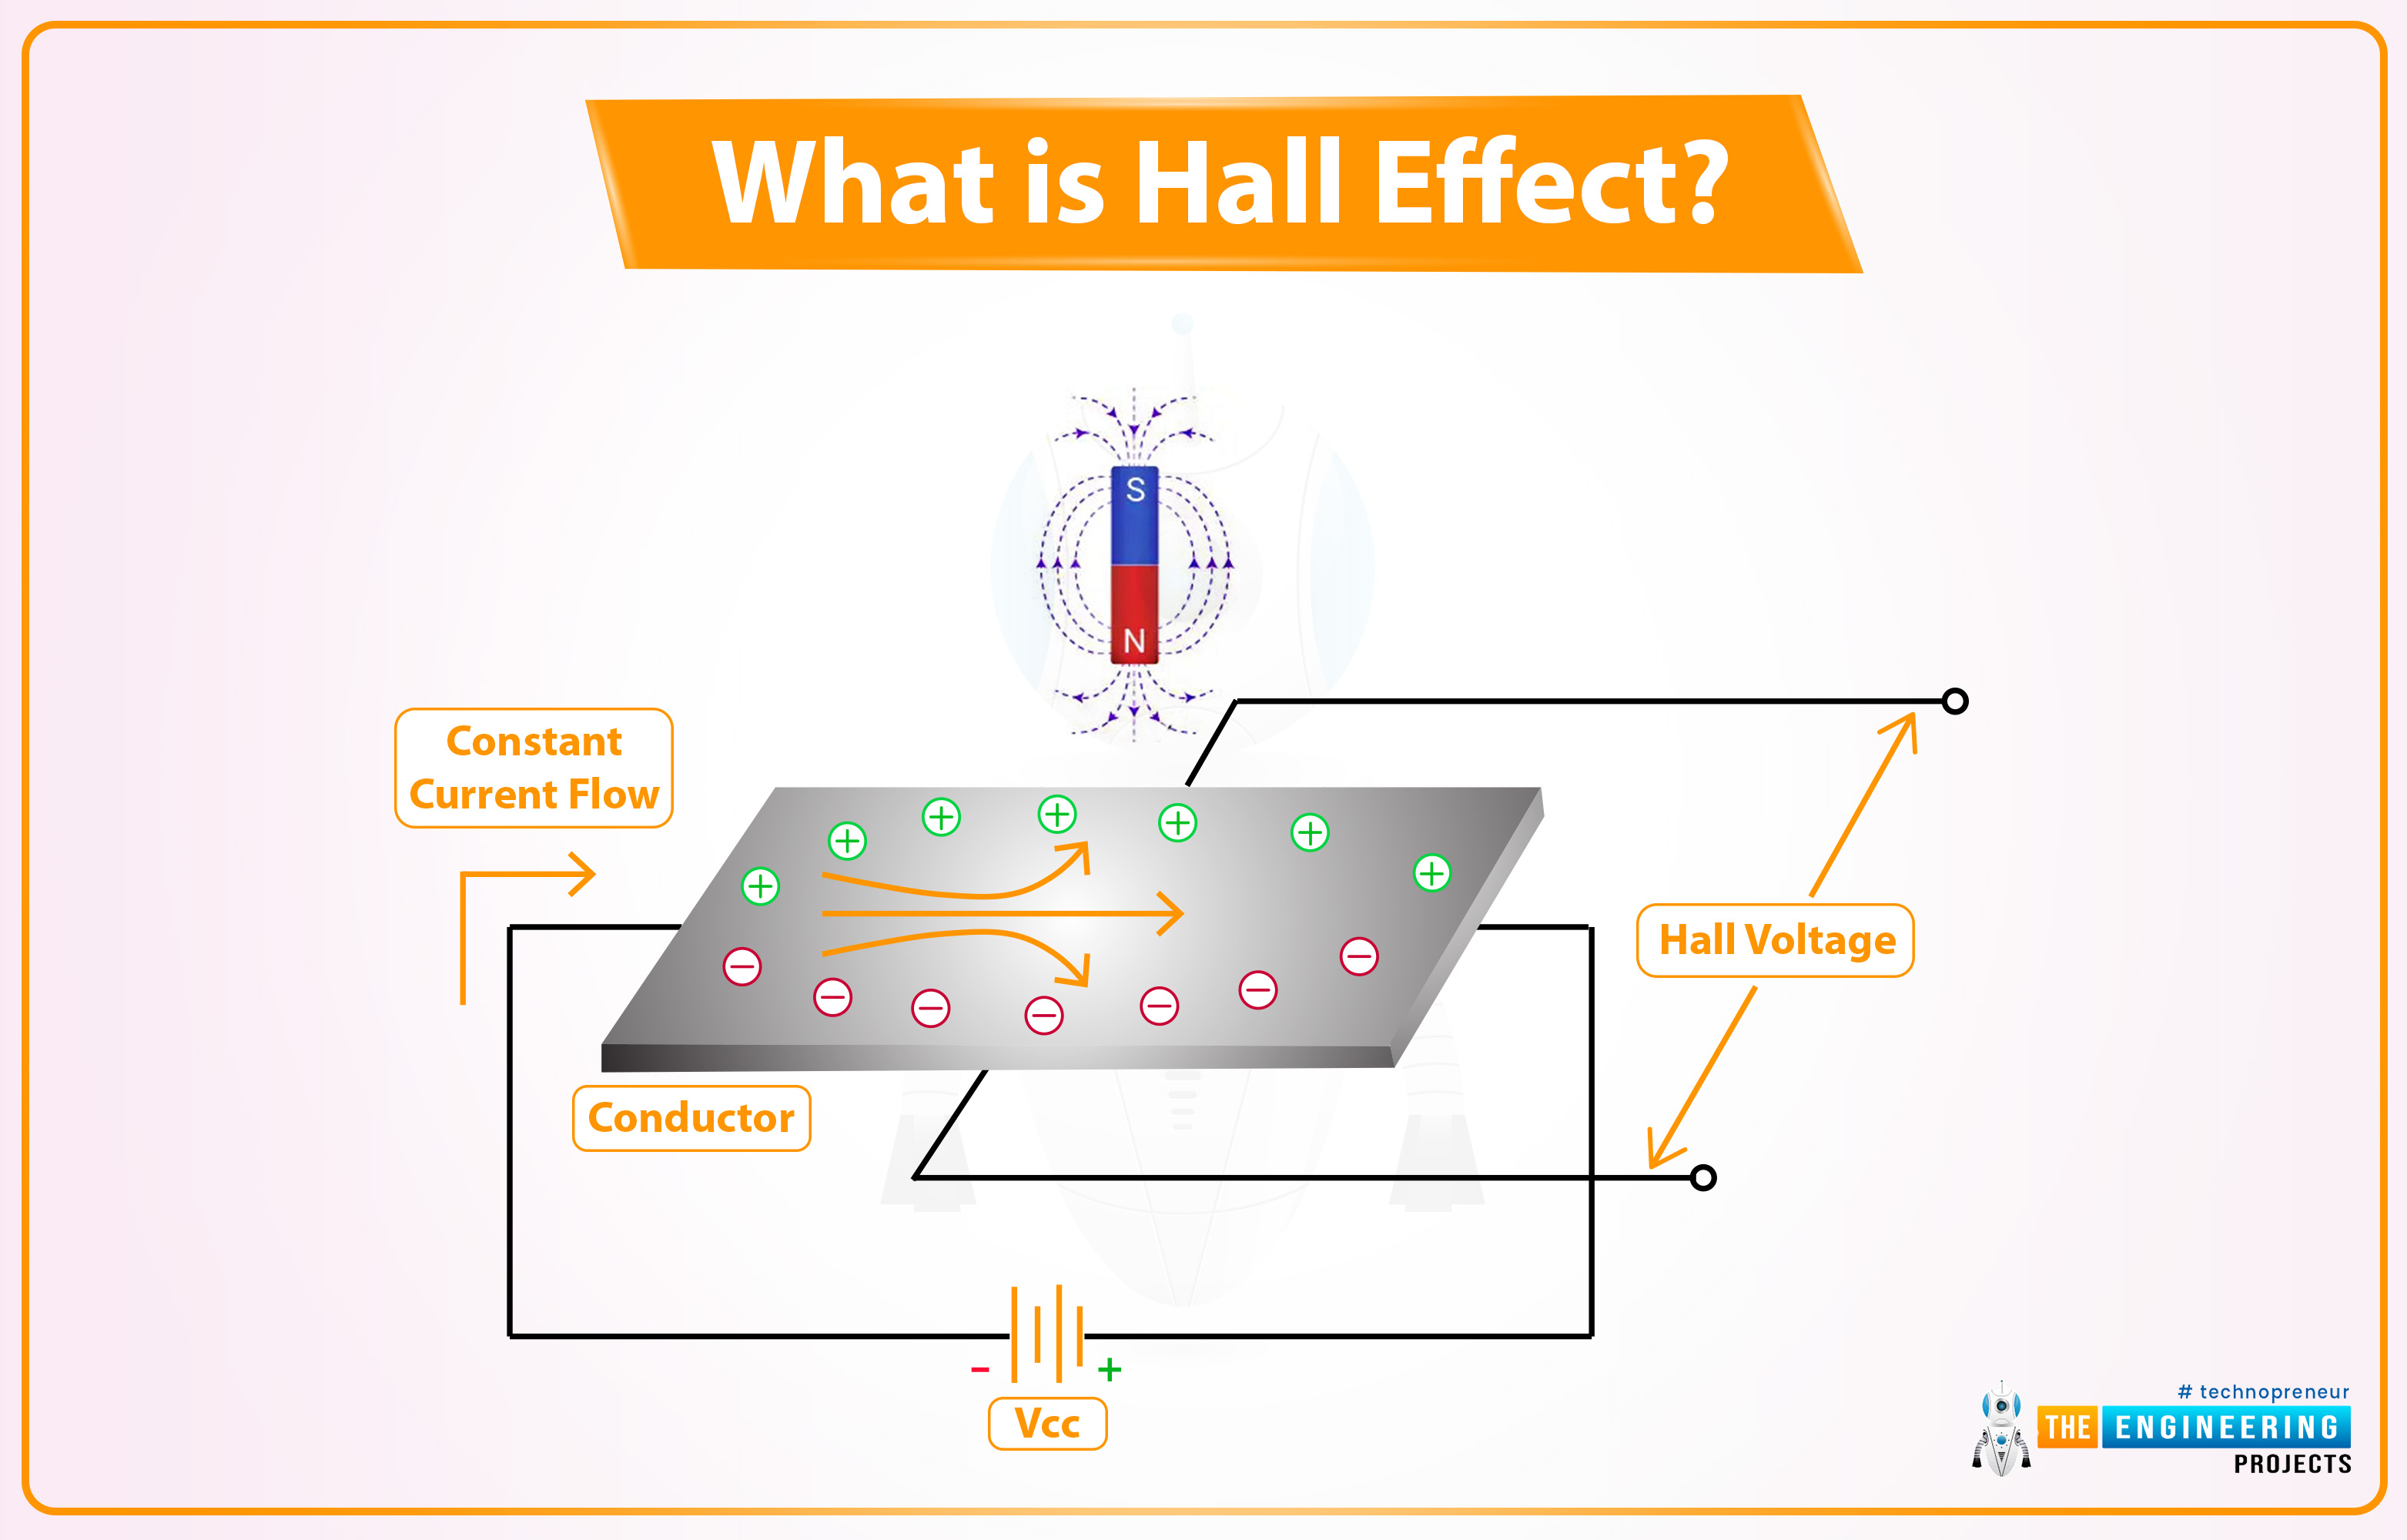 What is hall effect, How does hall effect sensors work, Applications of hall effect sensors, Hall Effect sensor in ESP32, ESP32 Hall Effect Sensor, Programming ESP32 Hall Effect Sensor using Arduino IDE